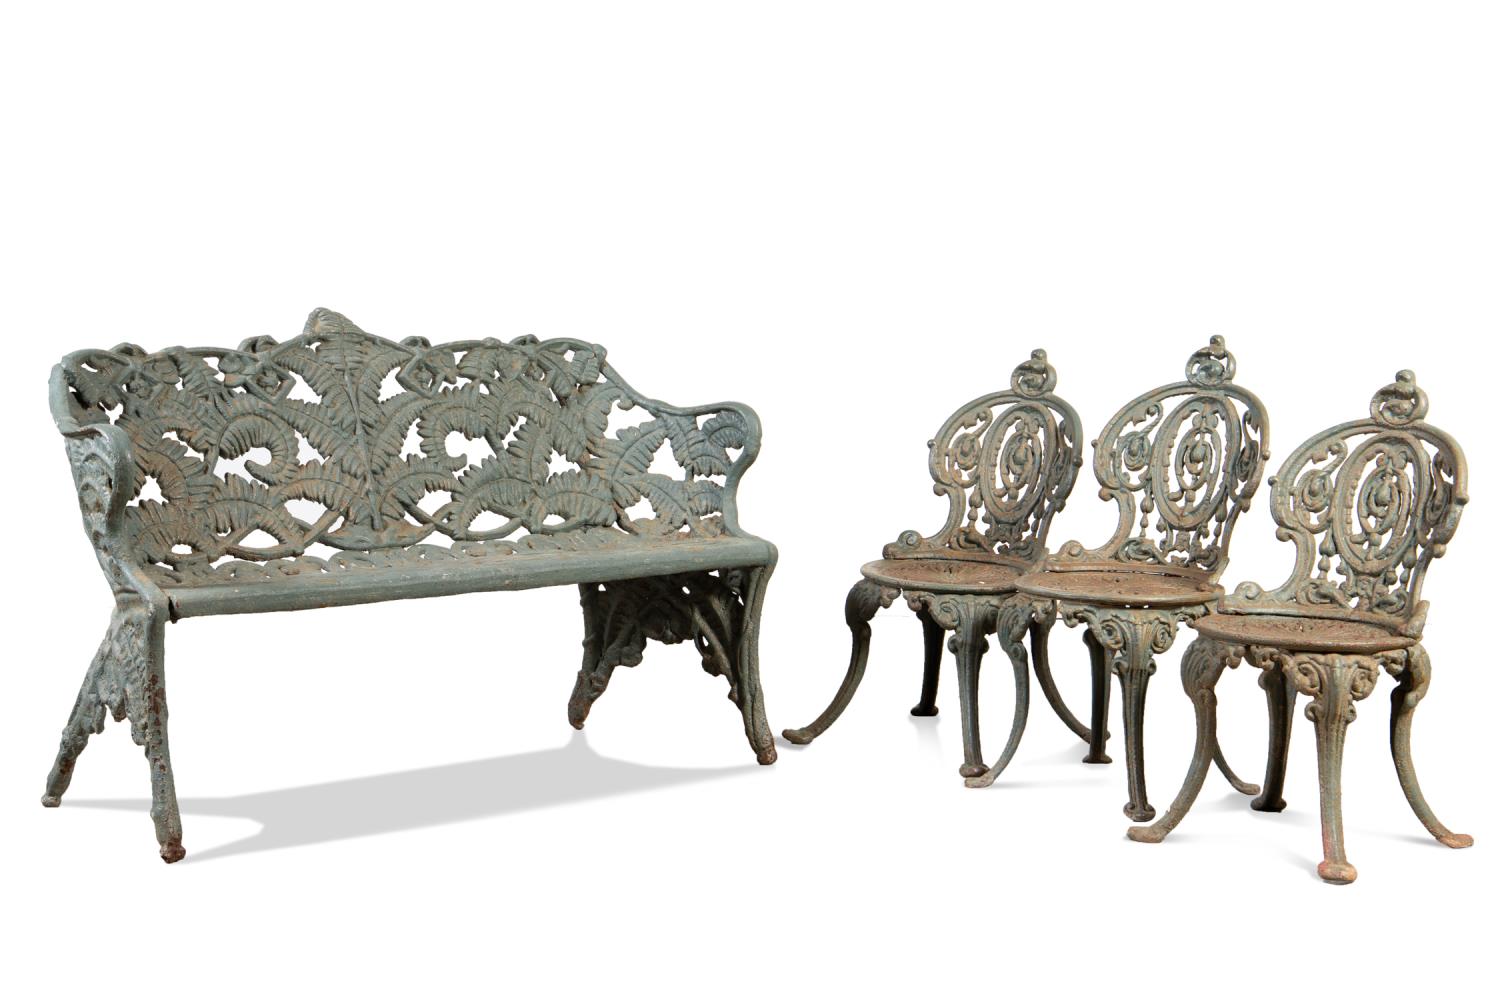 CAST IRON GARDEN GROUP, BENCH AND